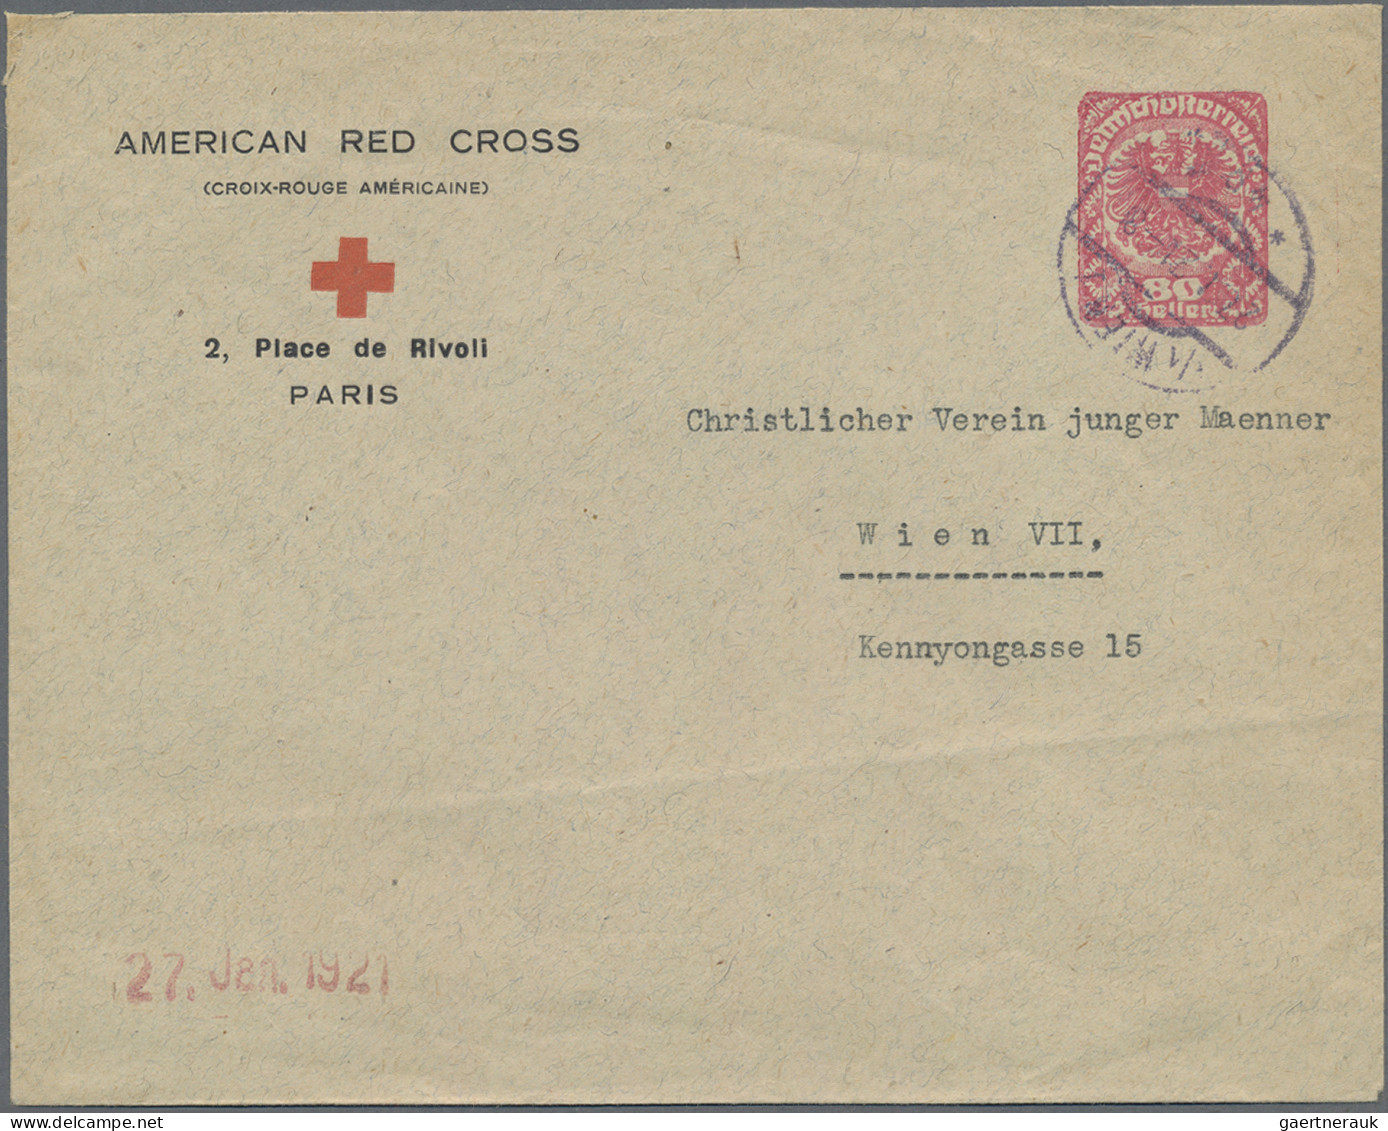 Thematics: Red Cross: 1921, "AMERICAN RED CROSS" (CROIX-ROUGE AMERICAINE) 2, Pla - Rode Kruis